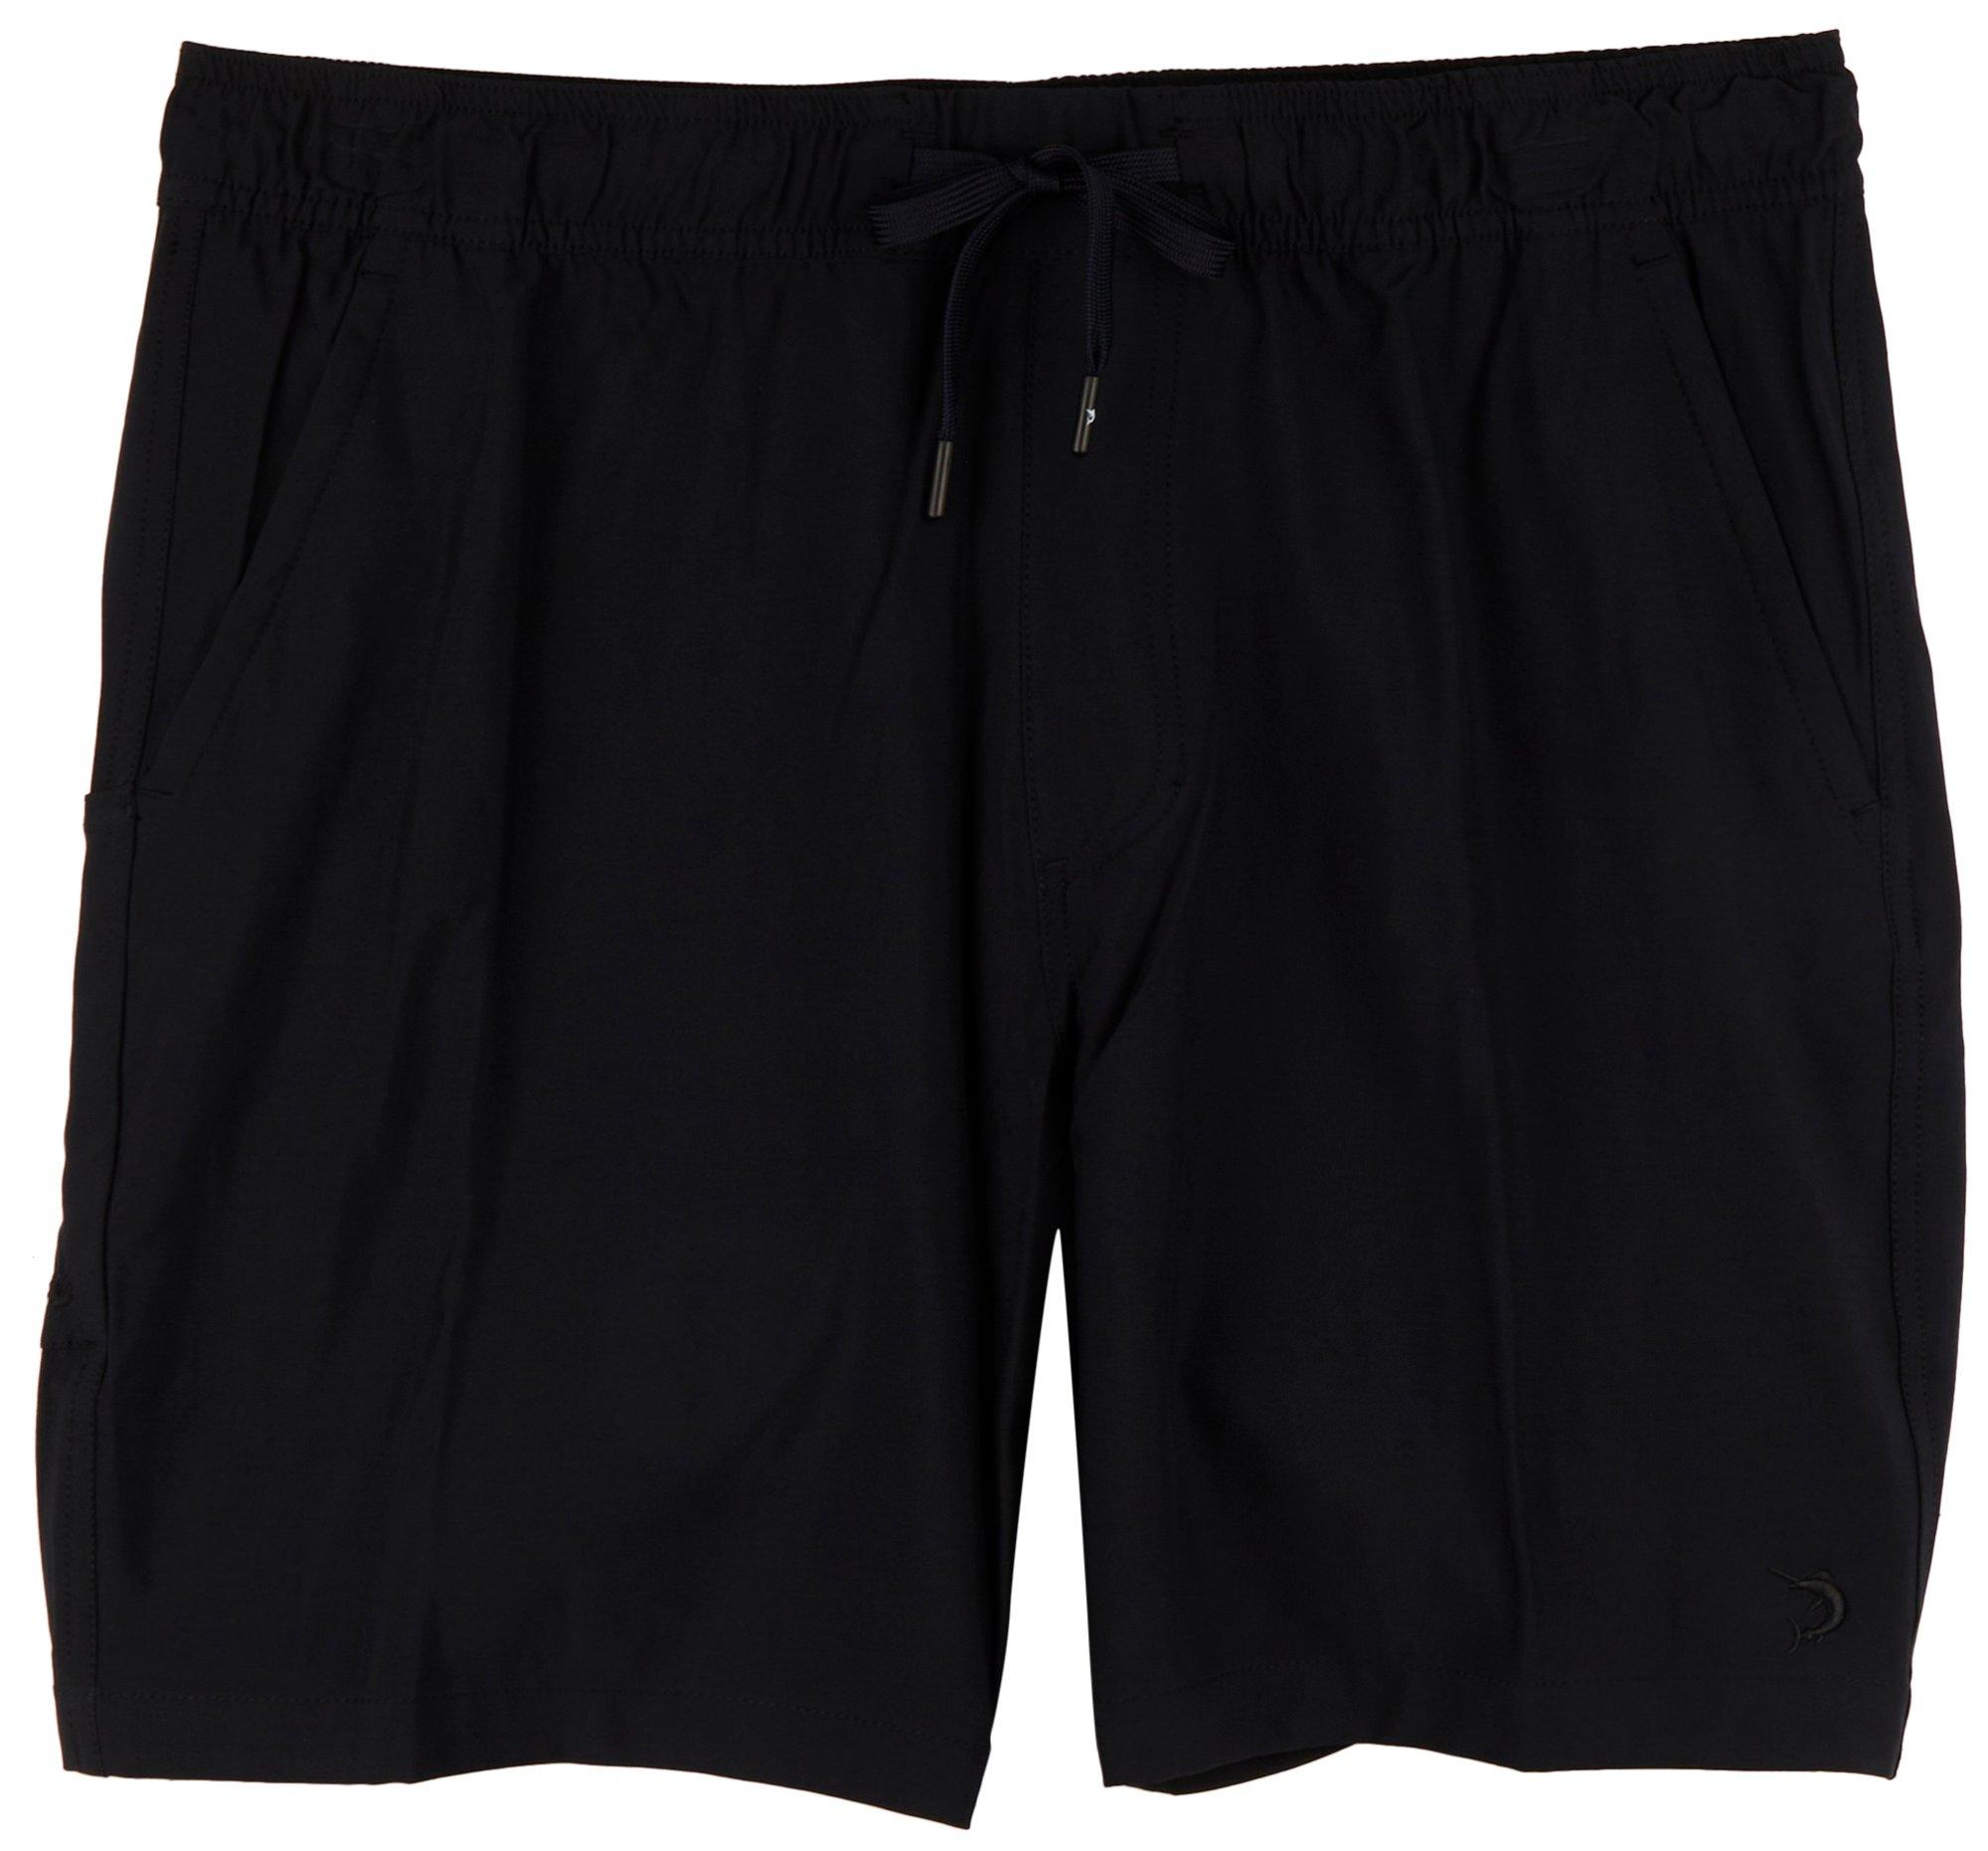 Mens 7 in. Pull On Performance Shorts